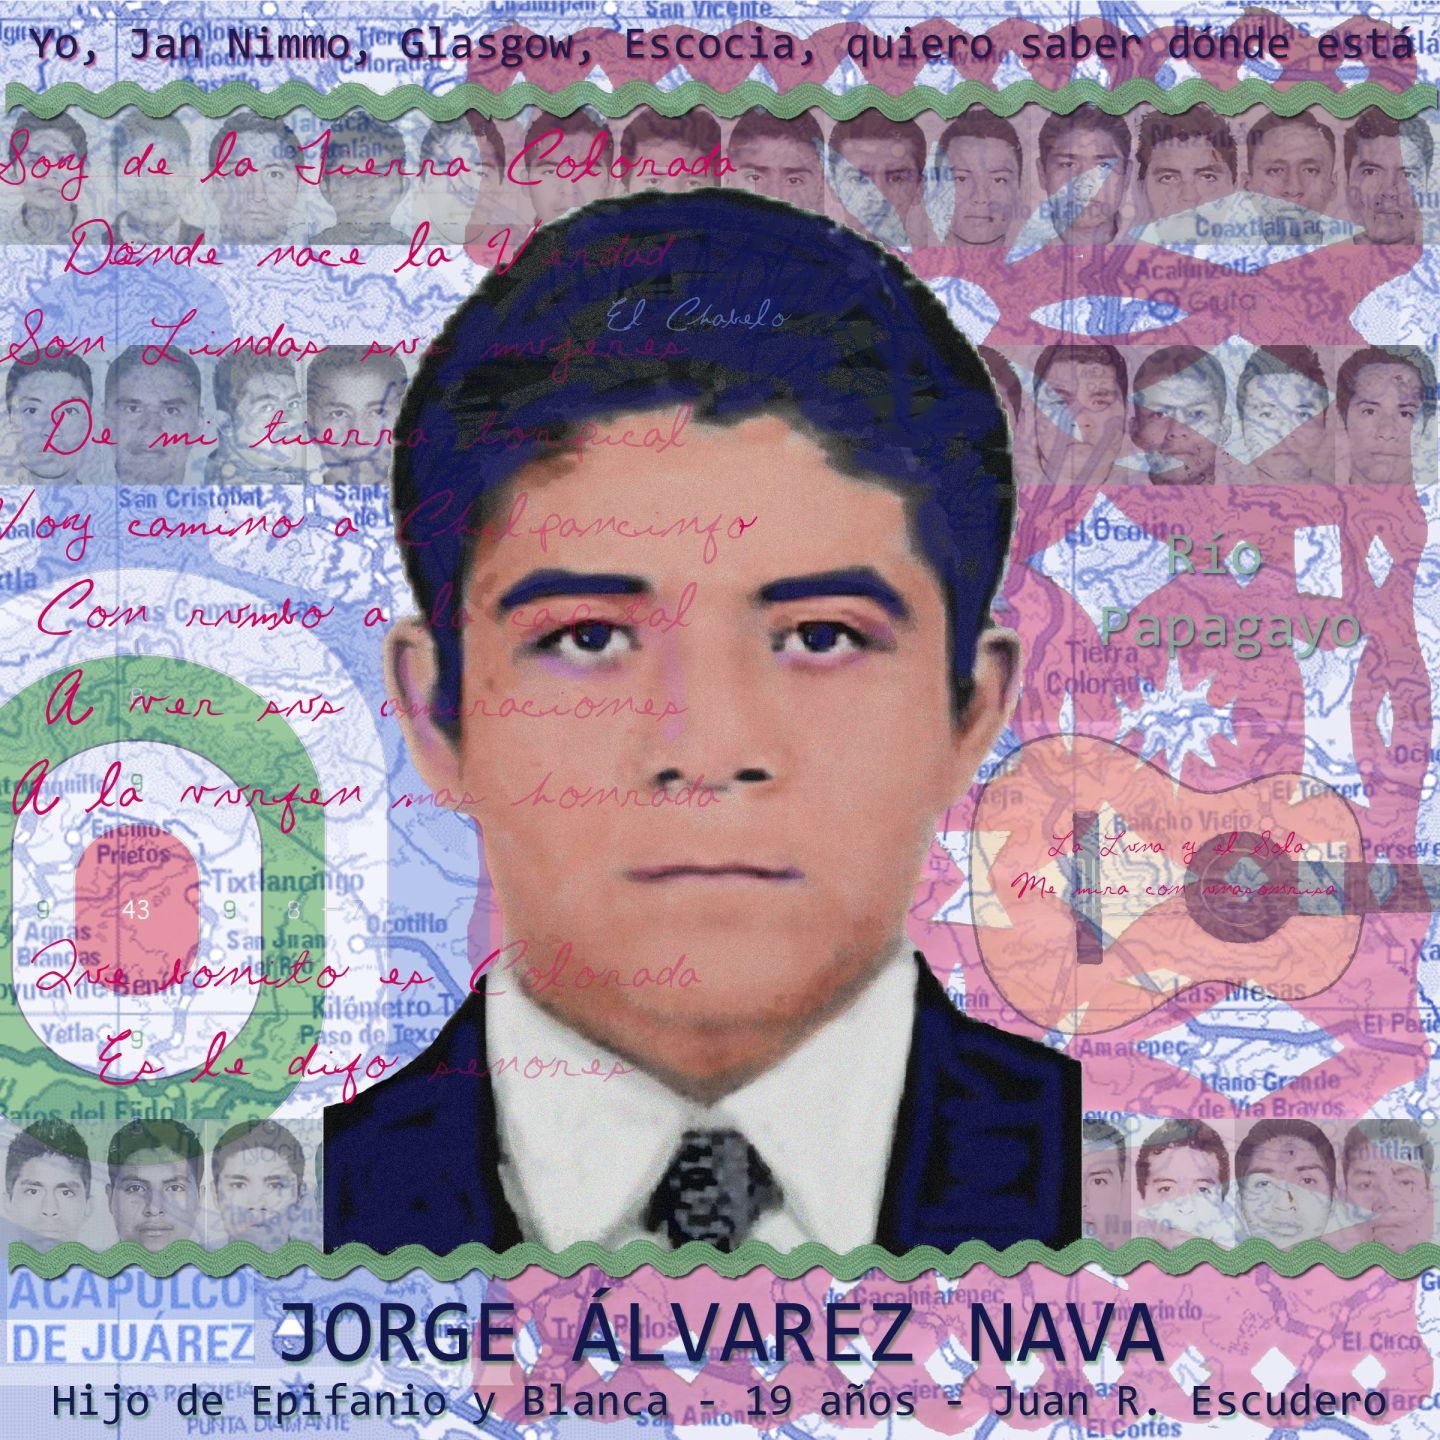 A tribute to Mexico's disappeared amidst demands for the truth 31